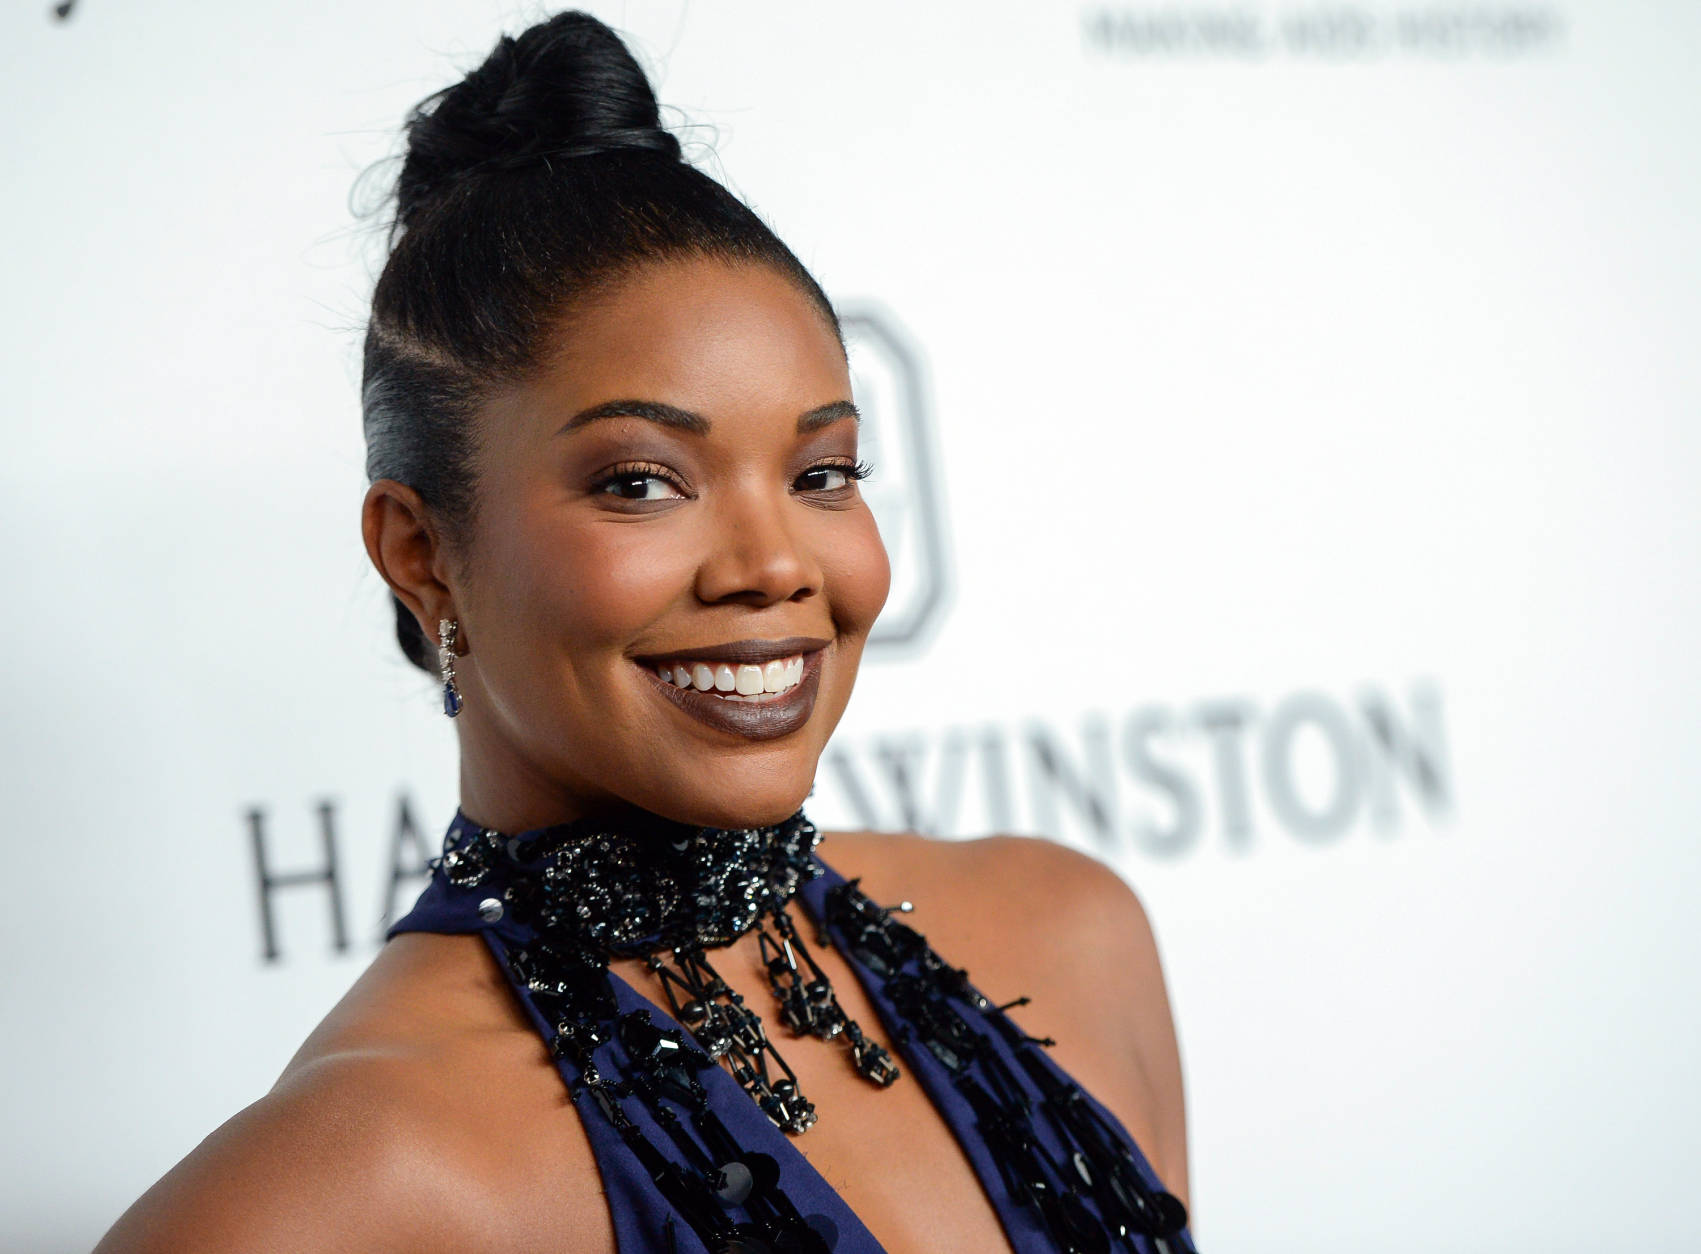 Actress Gabrielle Union attends the amfAR Inspiration Gala honoring Naomi Campbell and Kim Jones at Moynihan Station on Thursday, June 9, 2016, in New York. (Photo by Evan Agostini/Invision/AP)